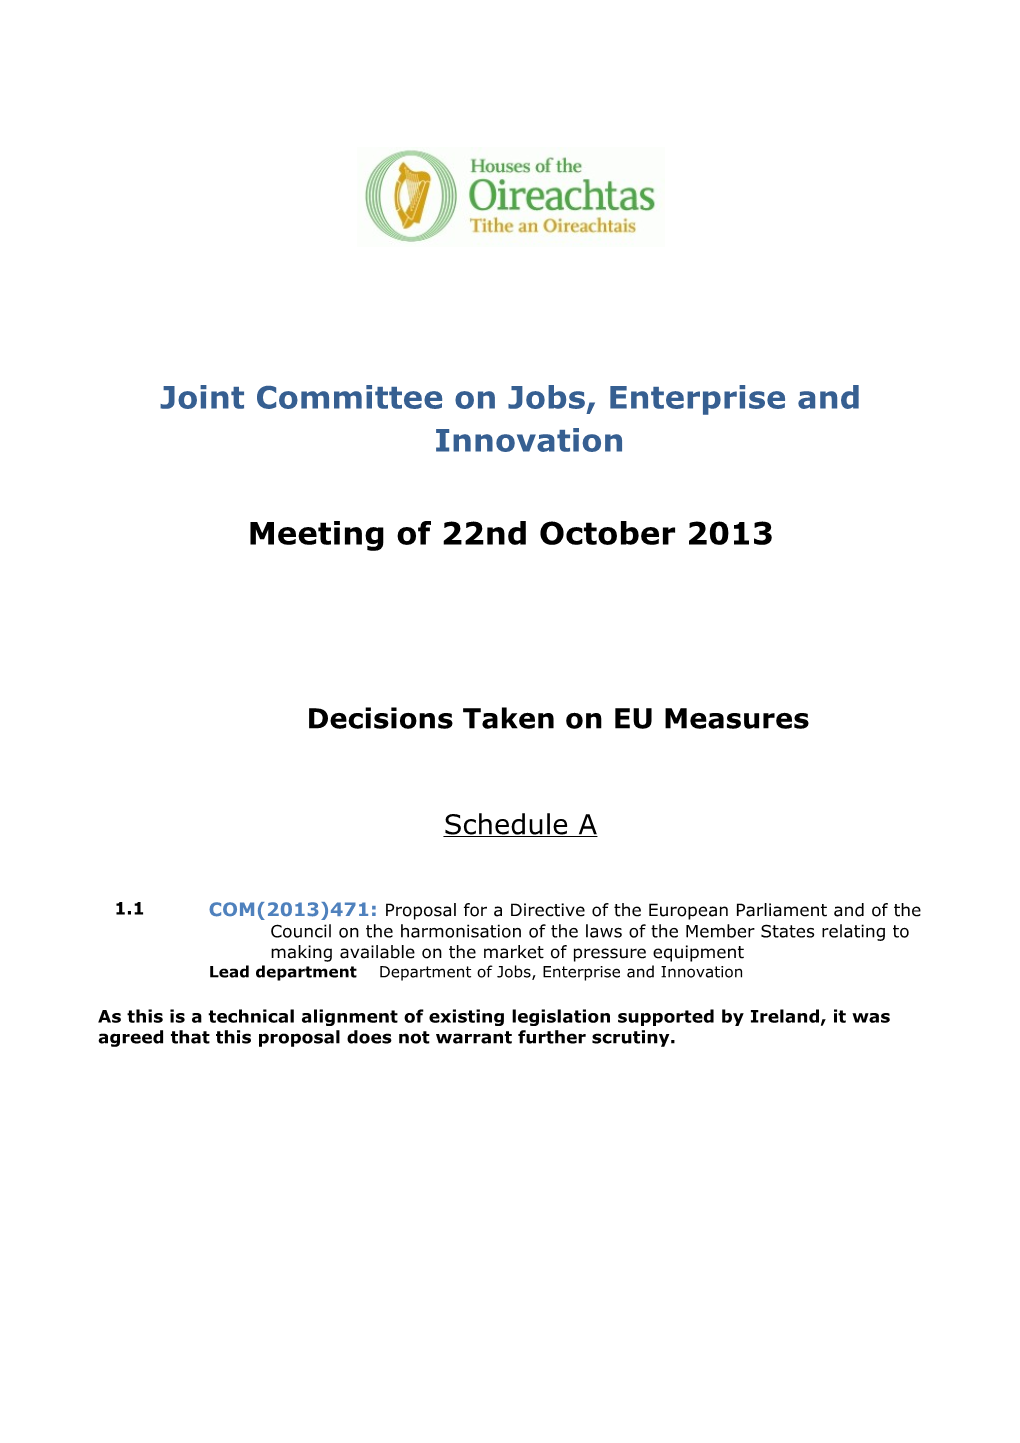 Joint Committee on Jobs, Enterprise and Innovation